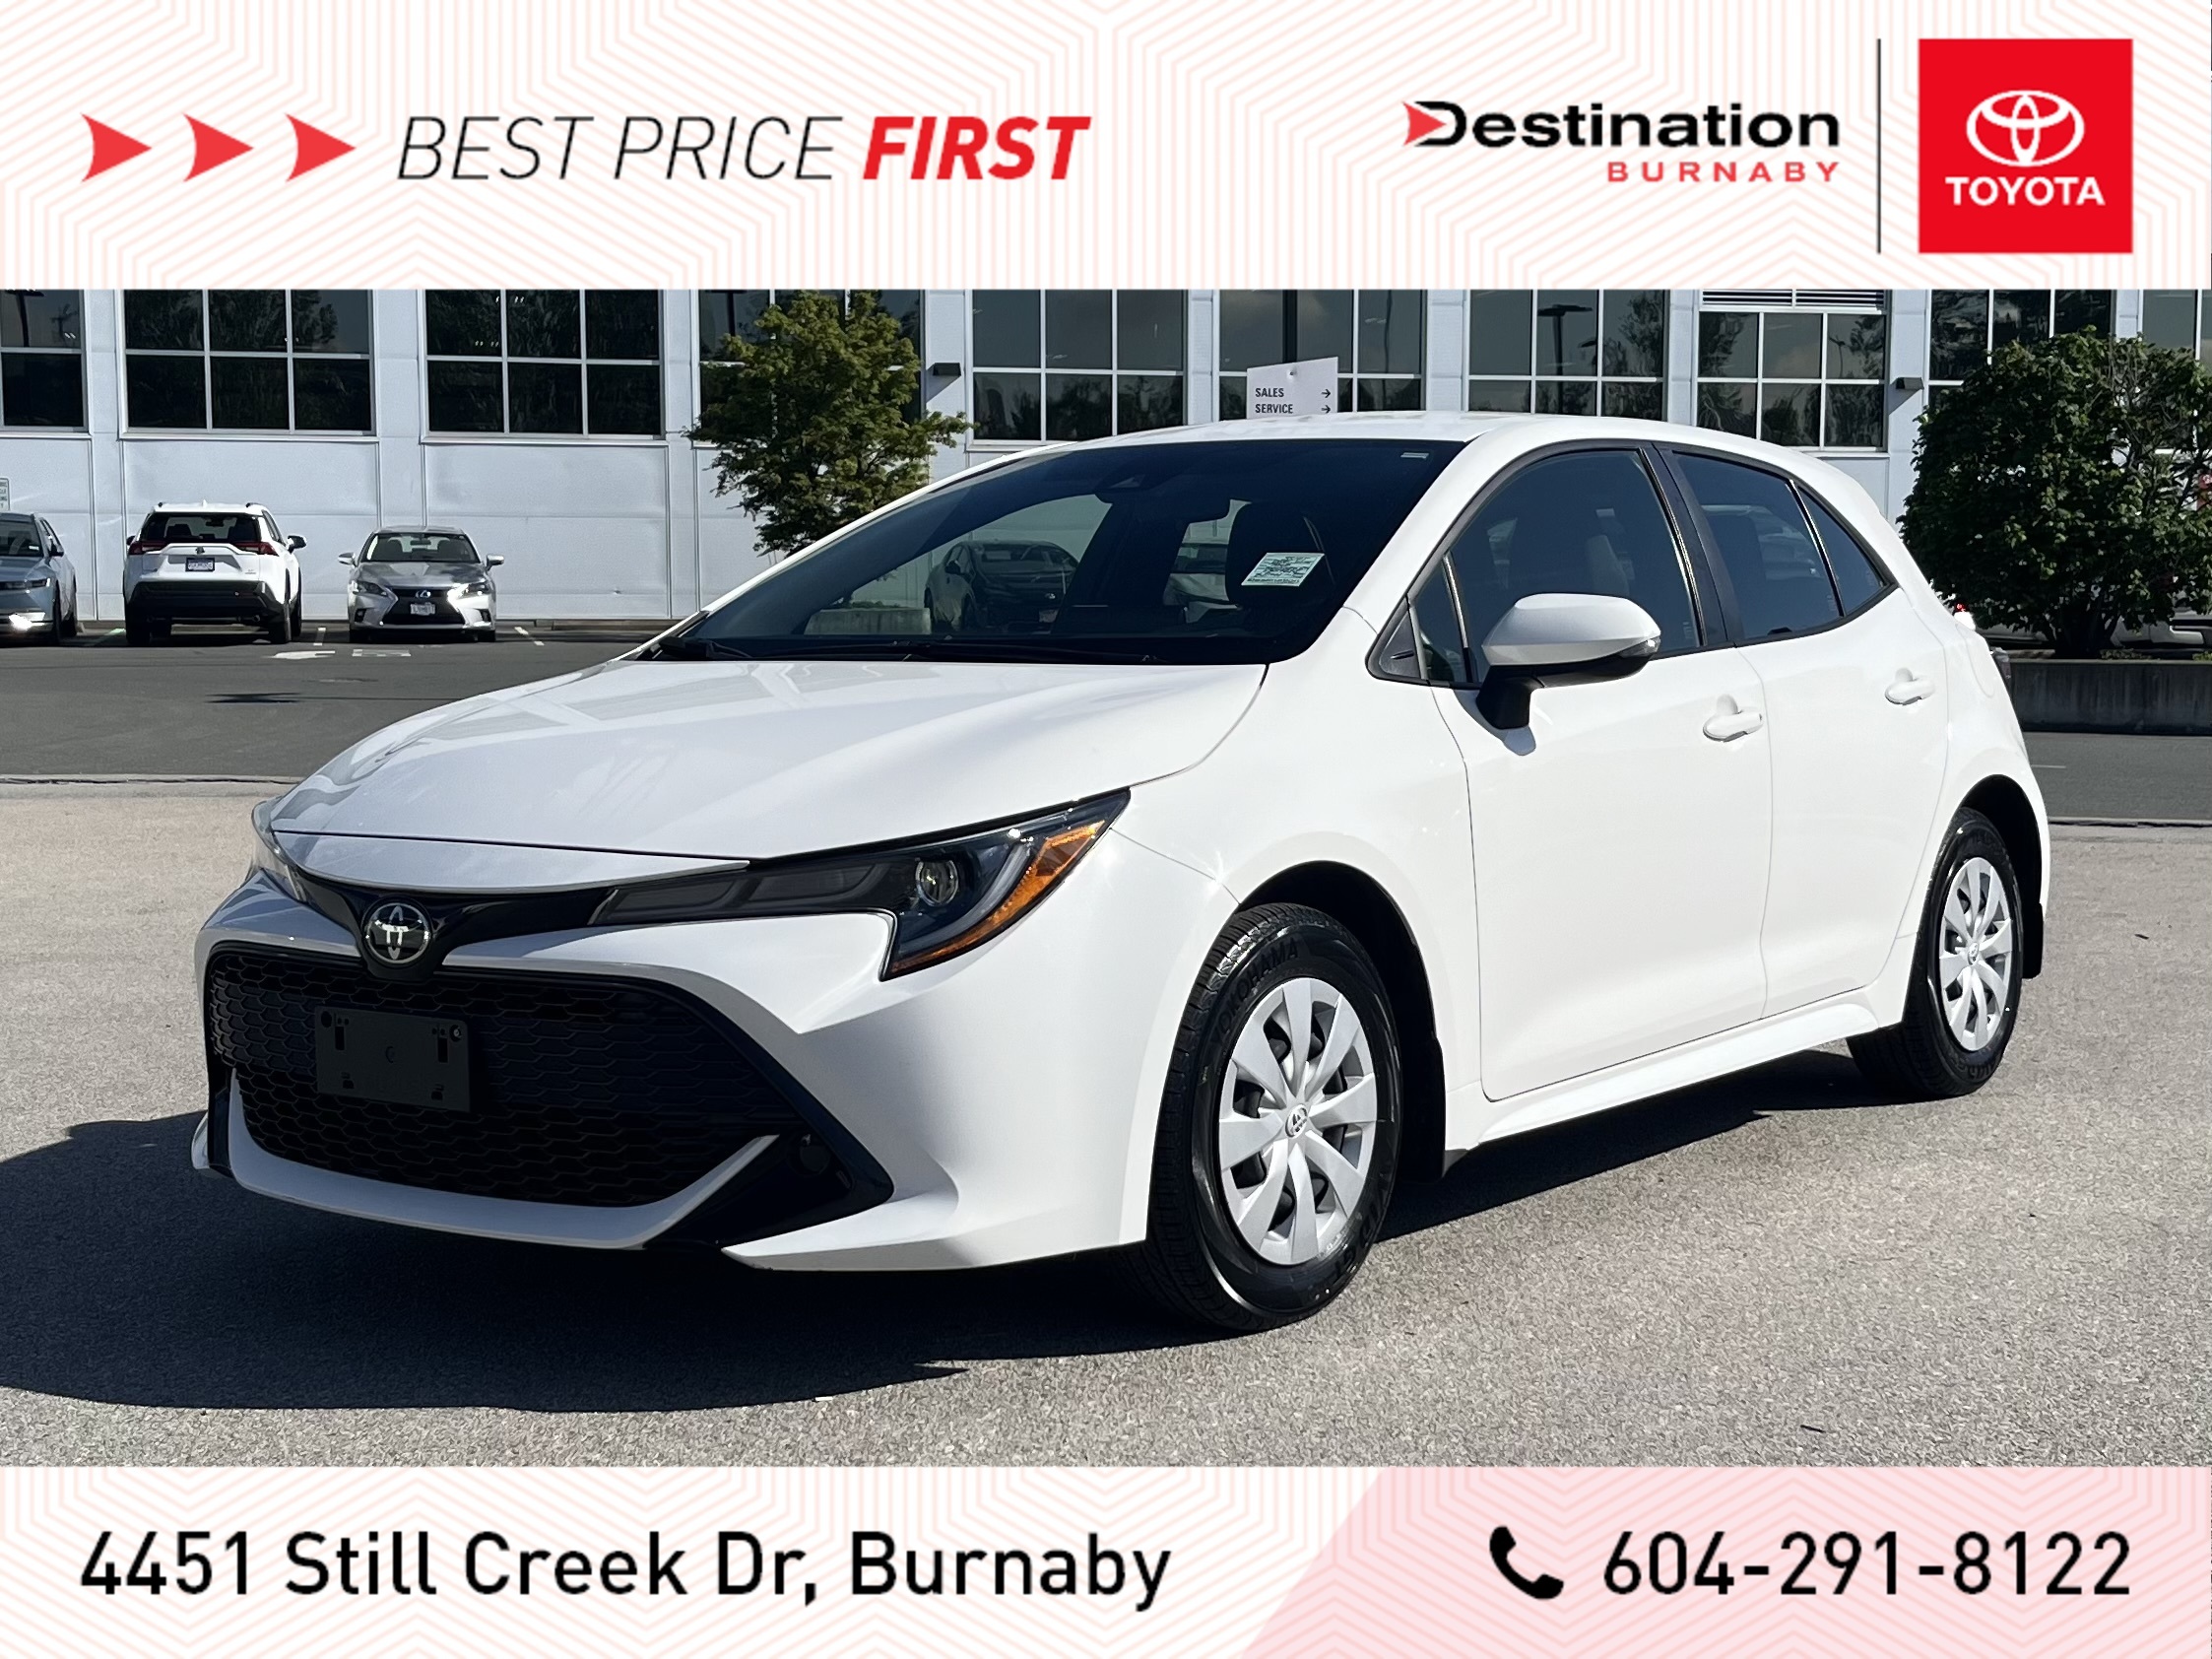 2019 Toyota Corolla Hatchback Hatch 6-speed, Low Kms, No accidents